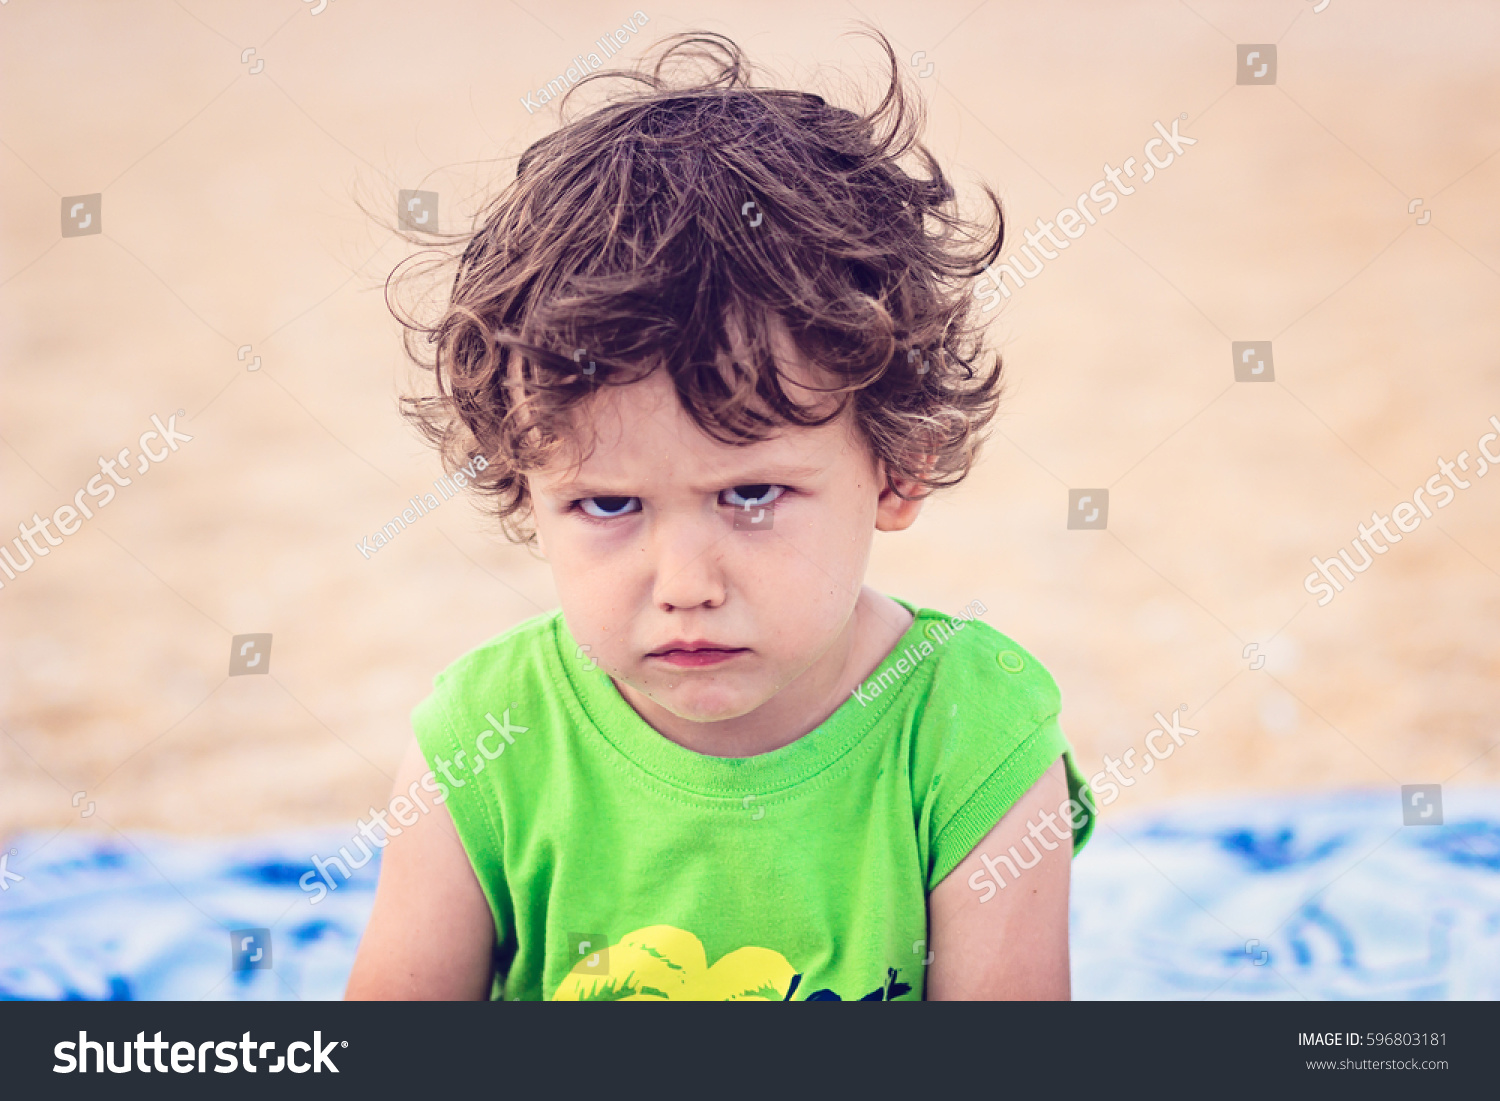 Portrait of toddler boy with angry upset face expression #596803181